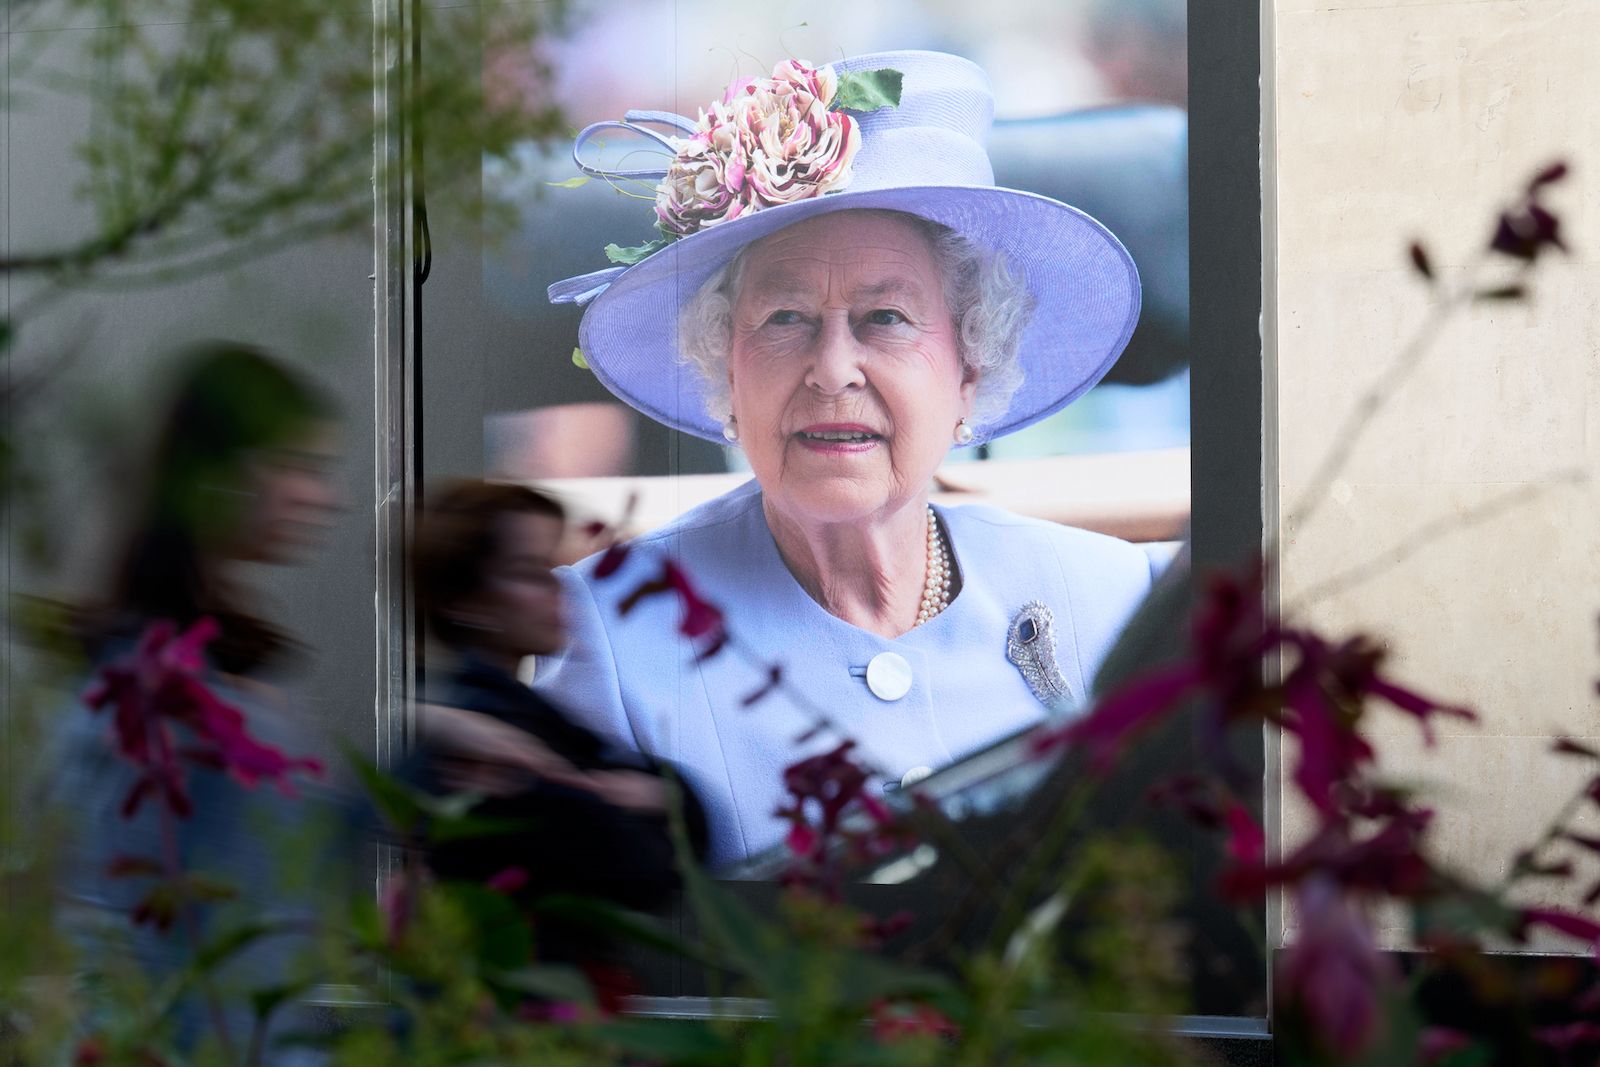 Can the Royal Family stay intact without the Queen?